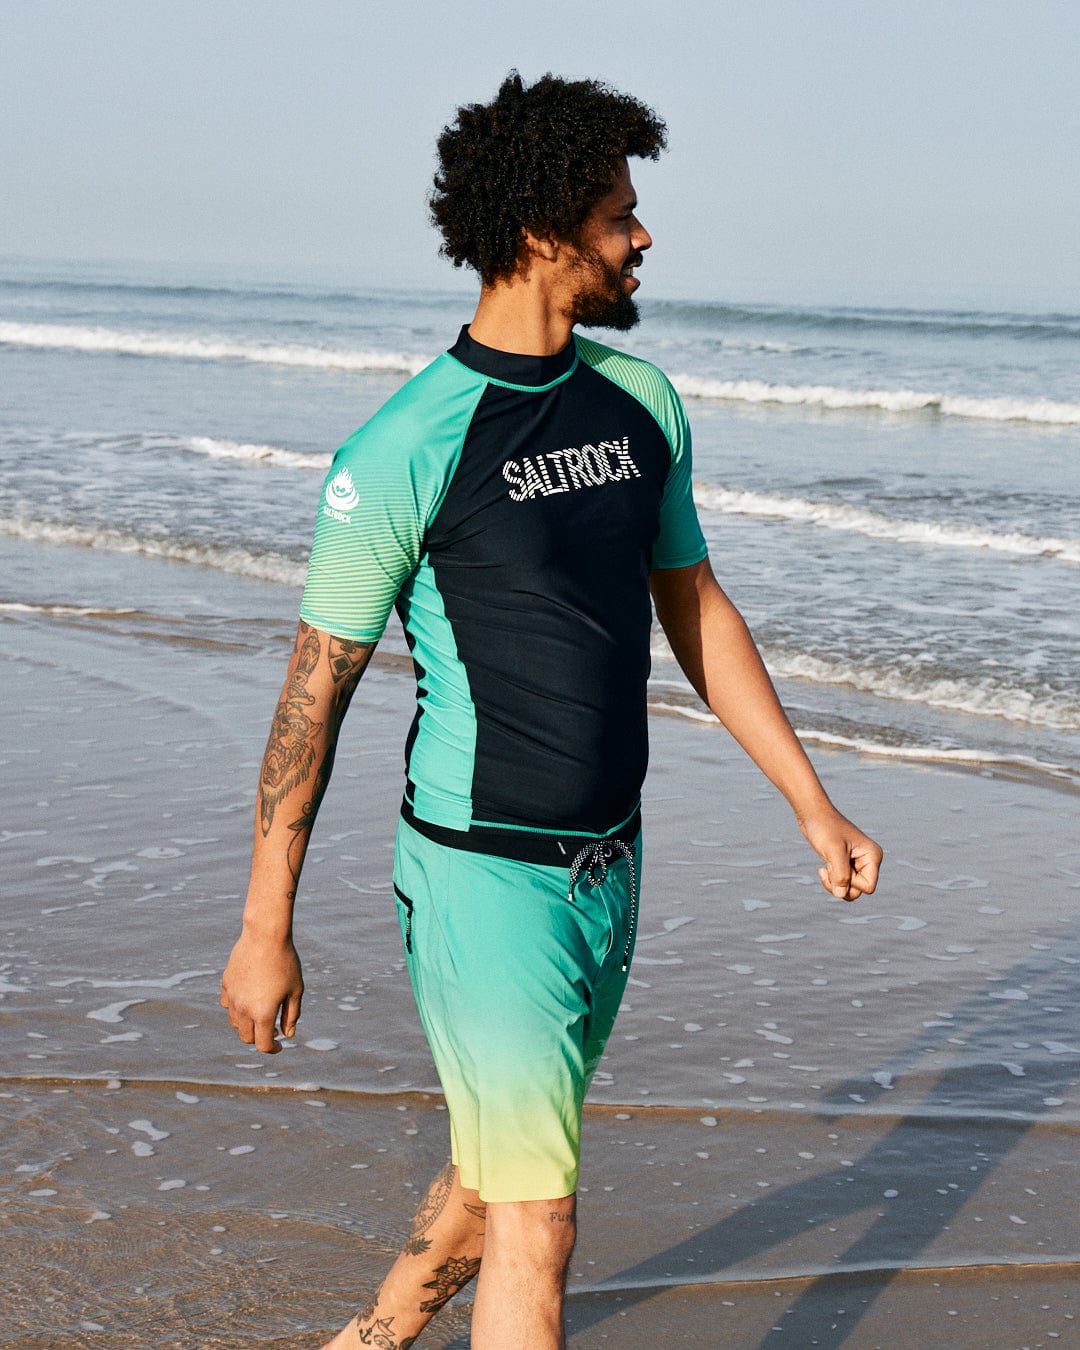 A man with curly hair, wearing a Saltrock DNA Wave Recycled Mens Short Sleeve Rashvest in Black/Green and teal shorts, walks along a sandy beach with the ocean in the background.